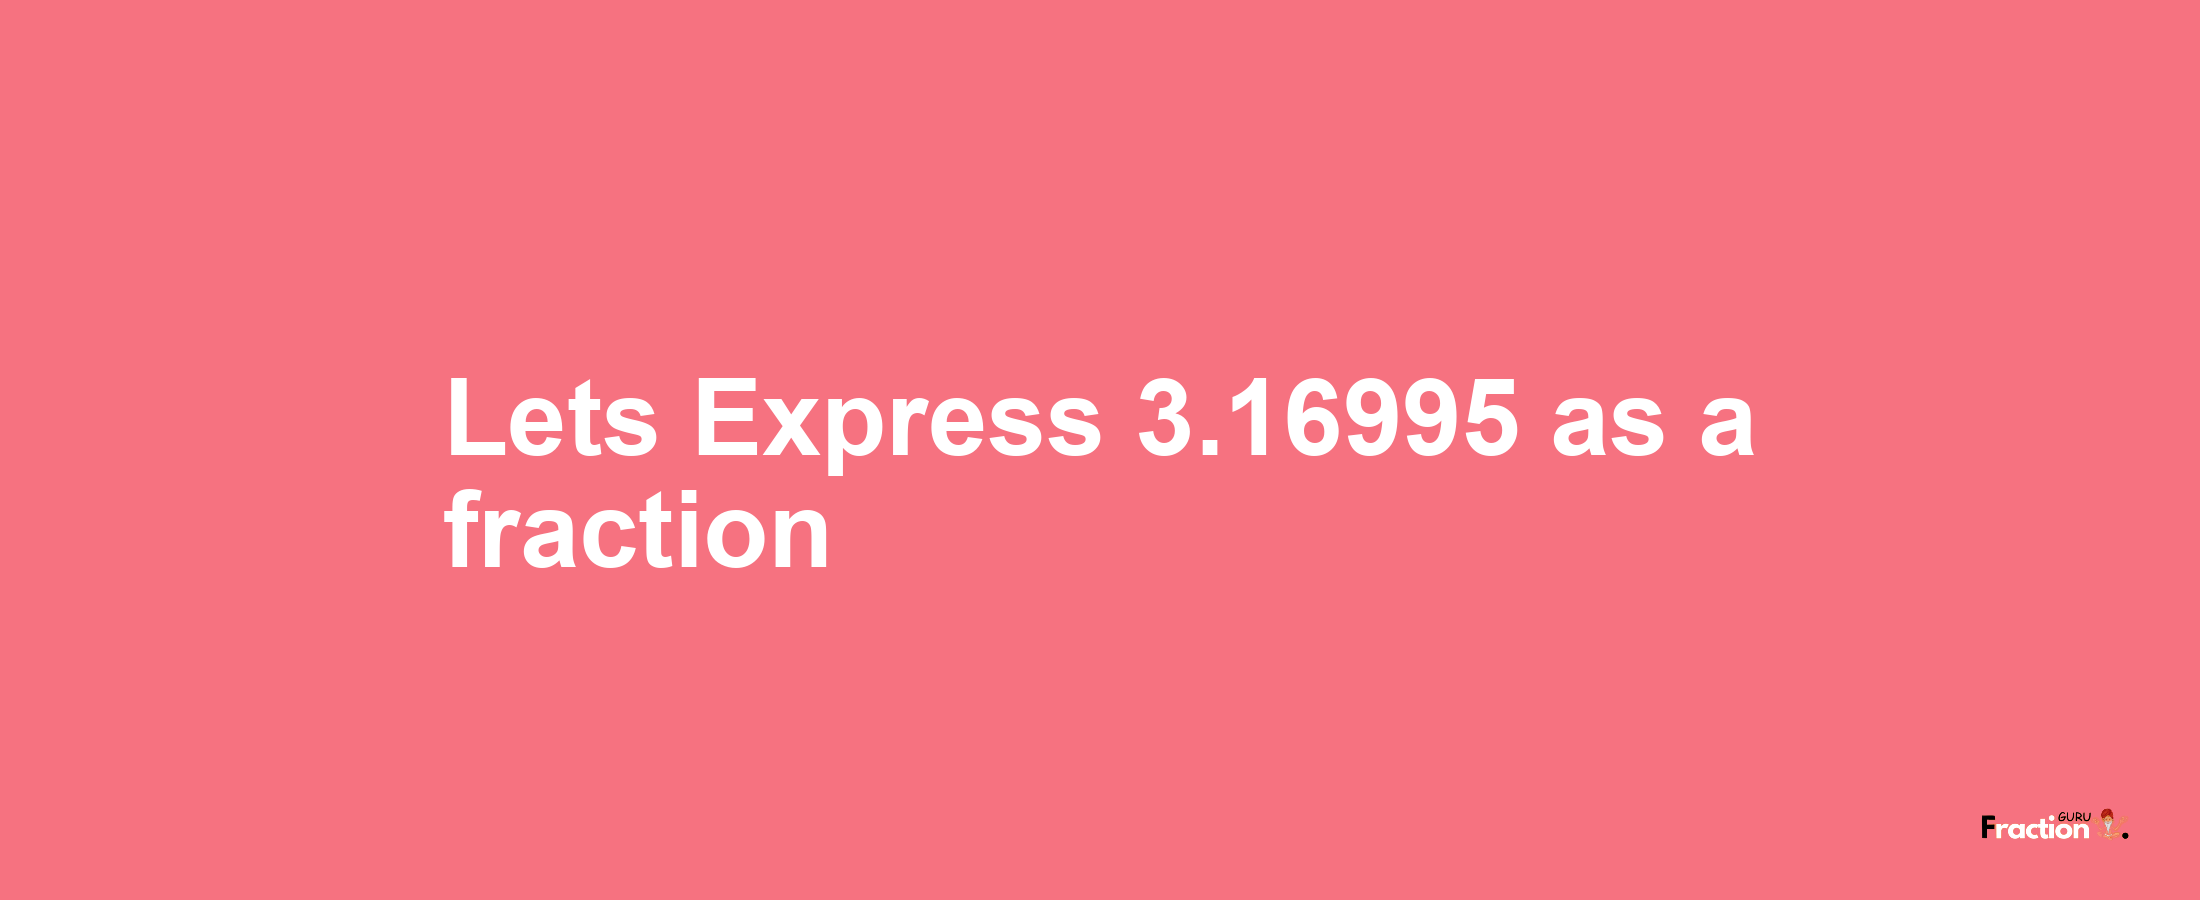 Lets Express 3.16995 as afraction